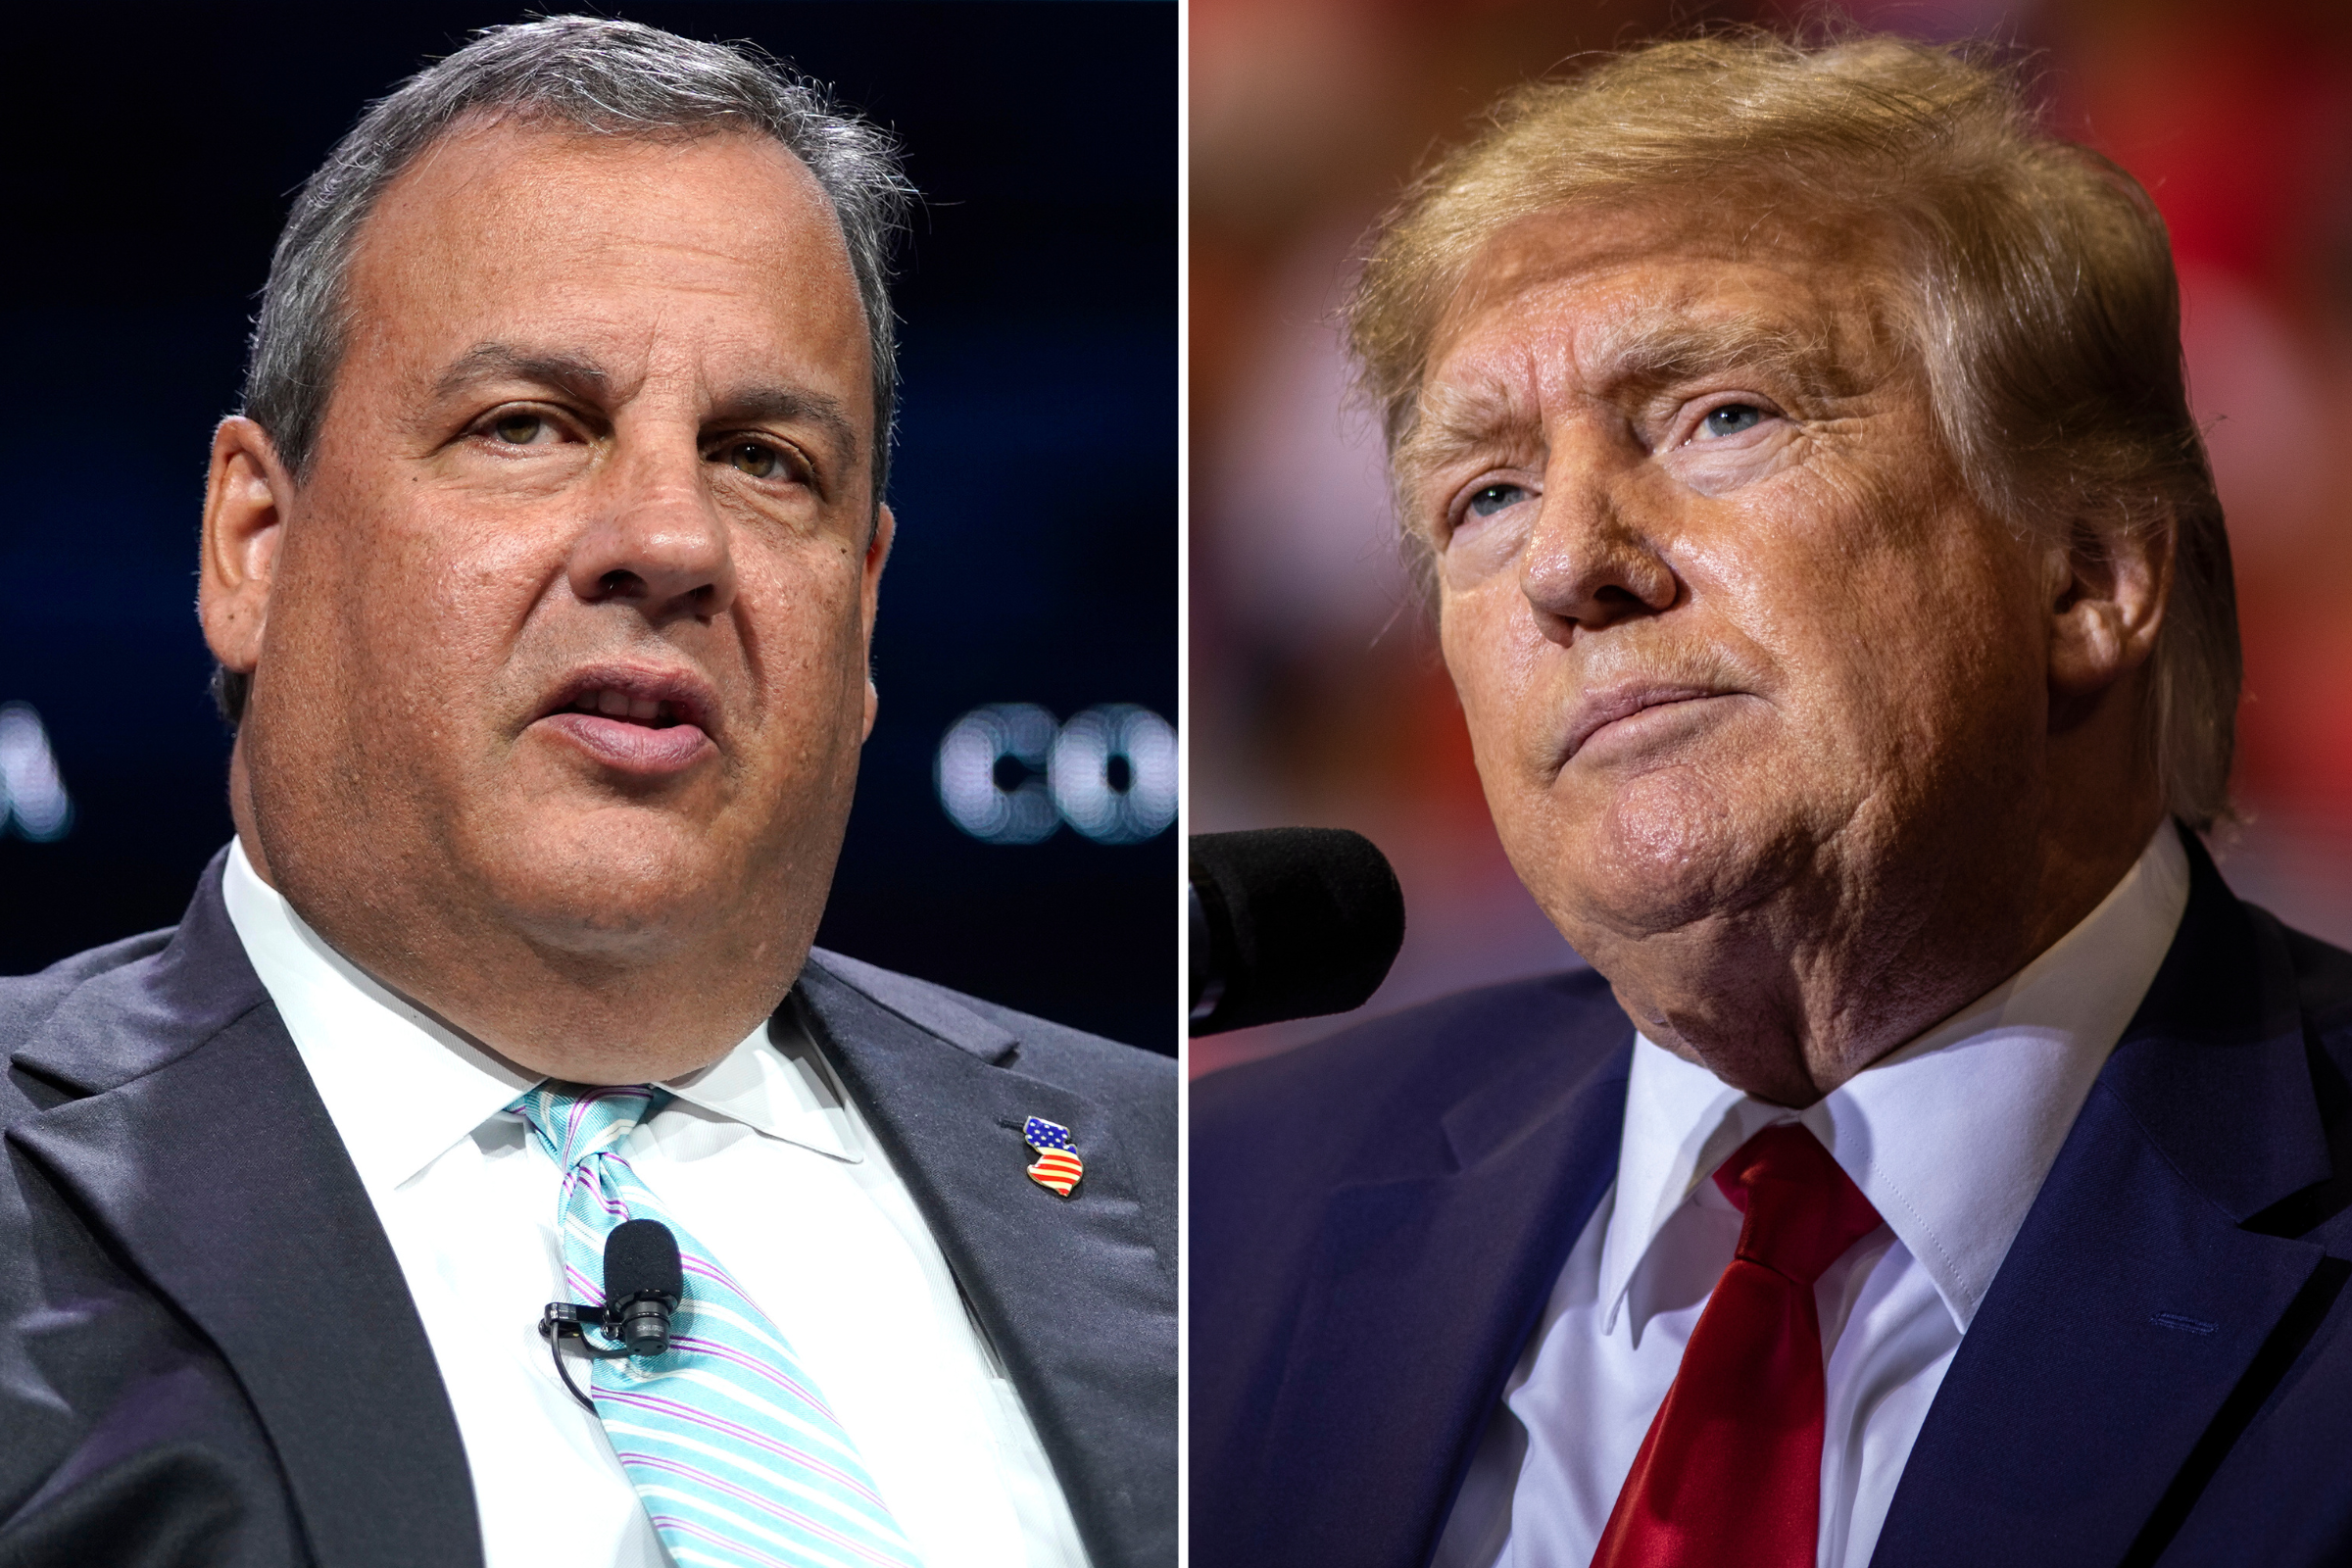 Donald Trump only "profits" from chaos and turmoil: Gov. Christie - breaking news today - World Updates - Public News Time